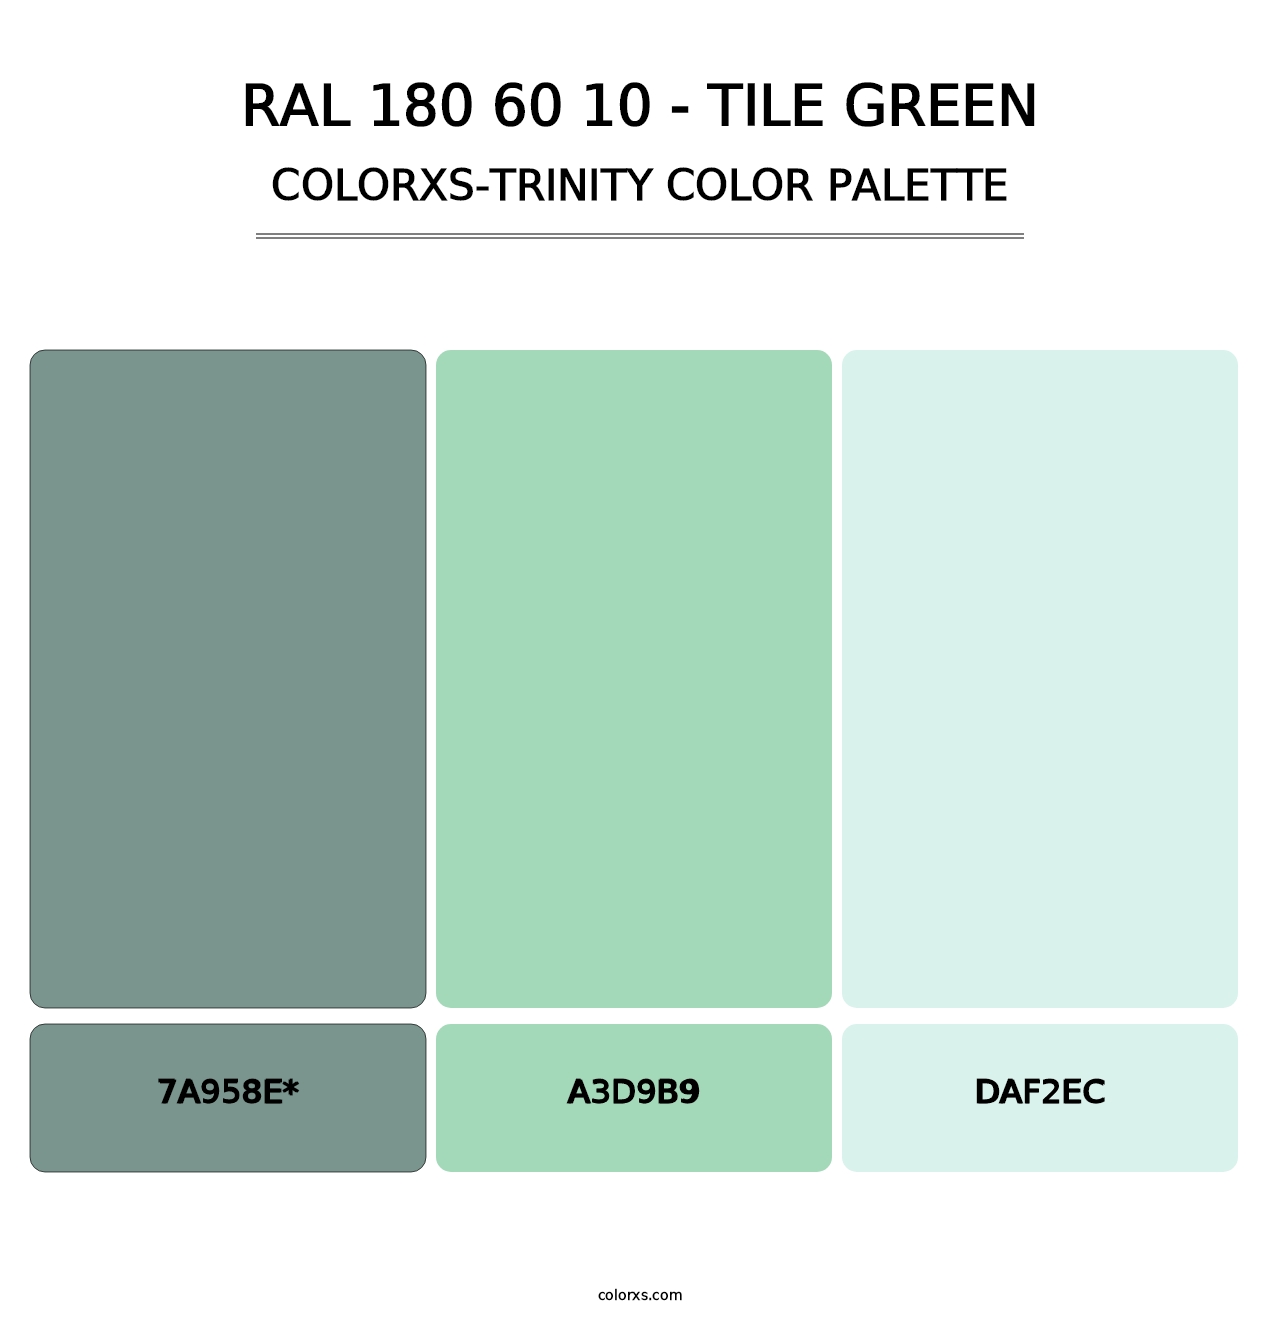 RAL 180 60 10 - Tile Green - Colorxs Trinity Palette